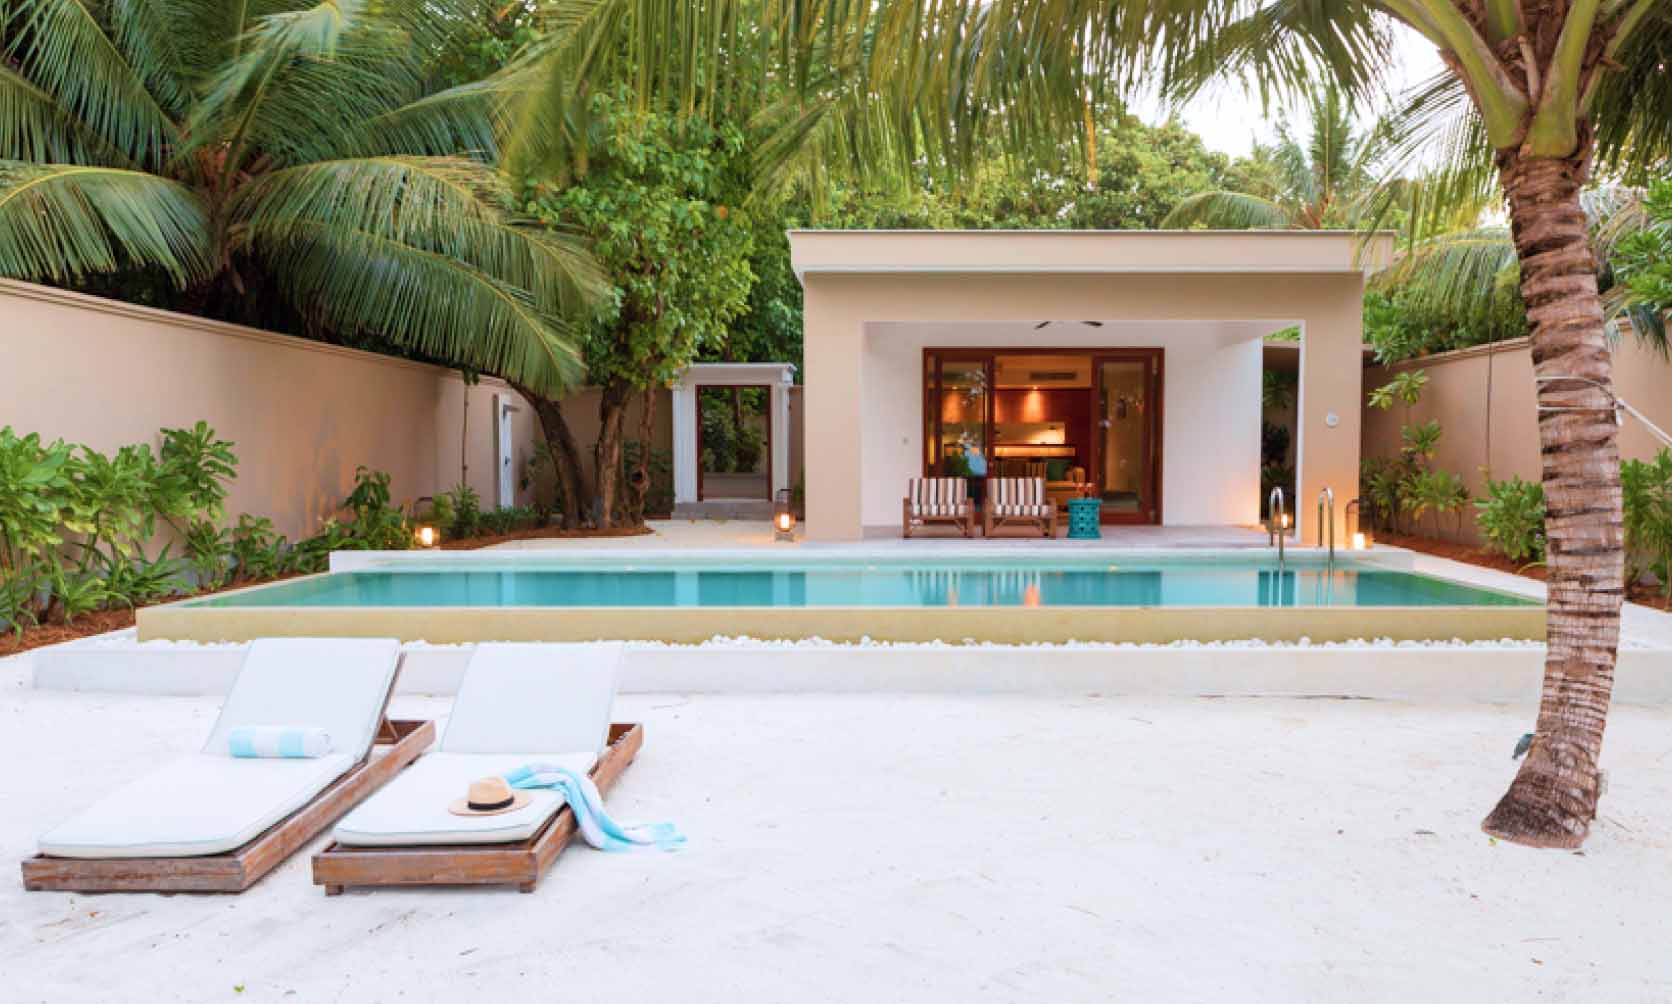 An outside view of our one bedroom villa's pool and sundeck from the beach.